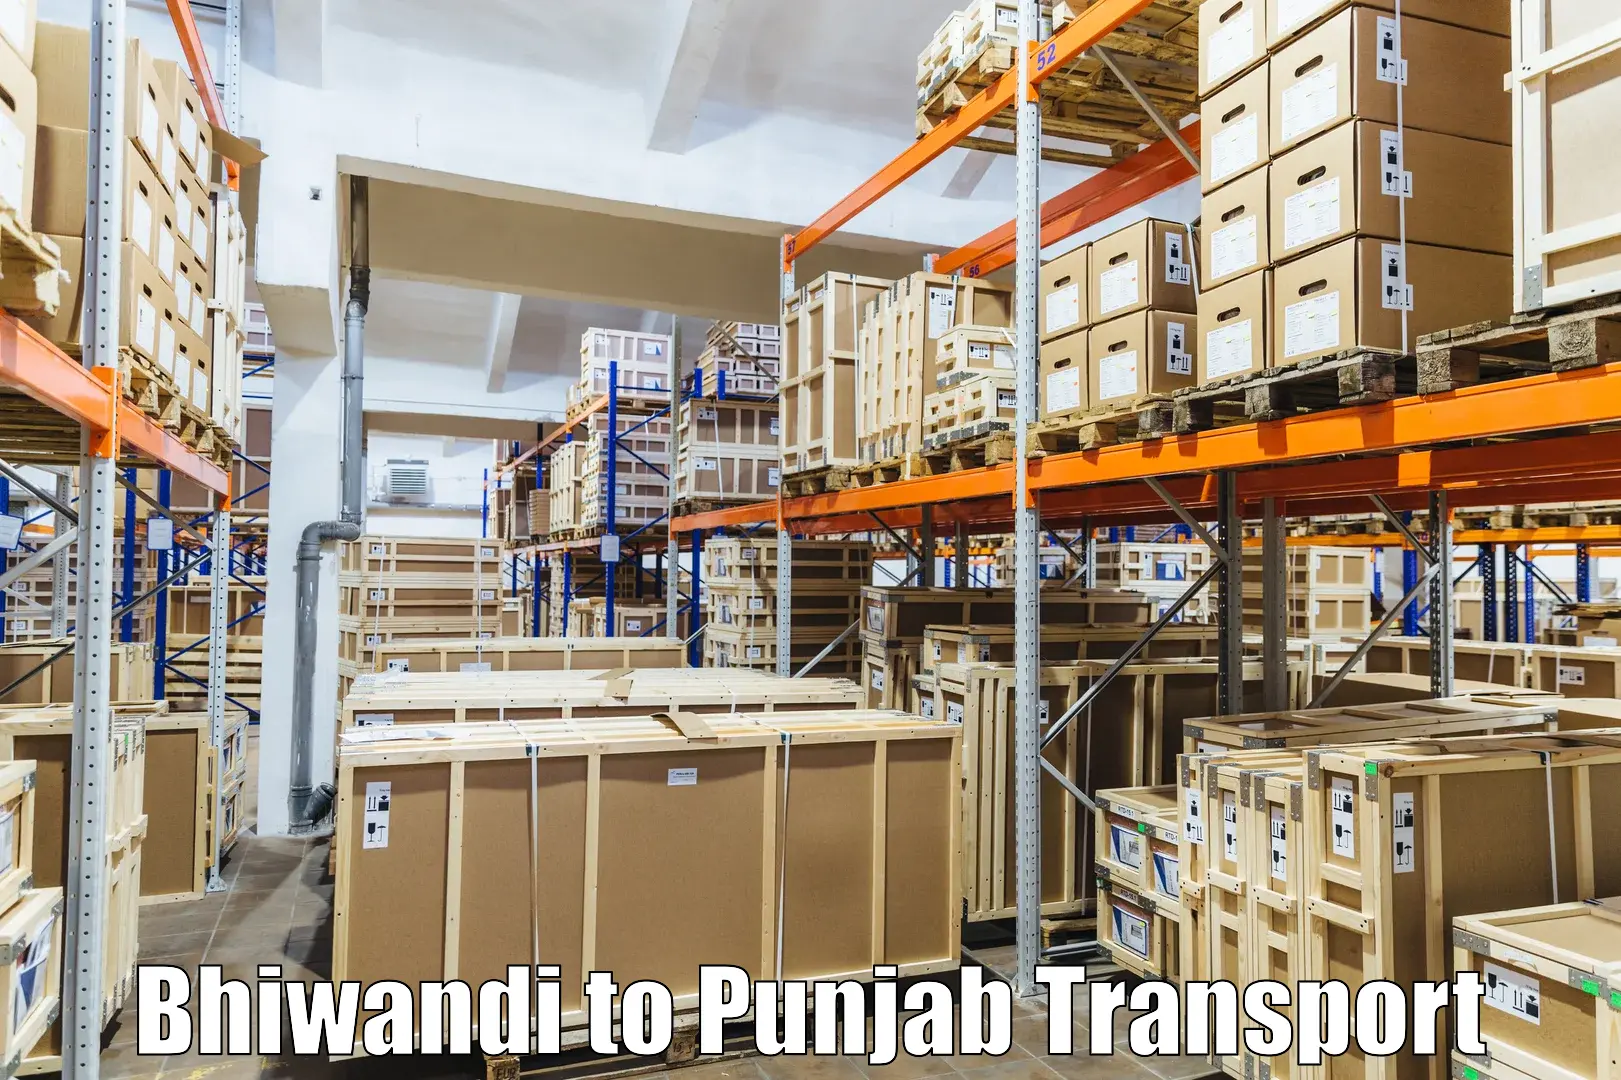 Daily parcel service transport Bhiwandi to Ropar